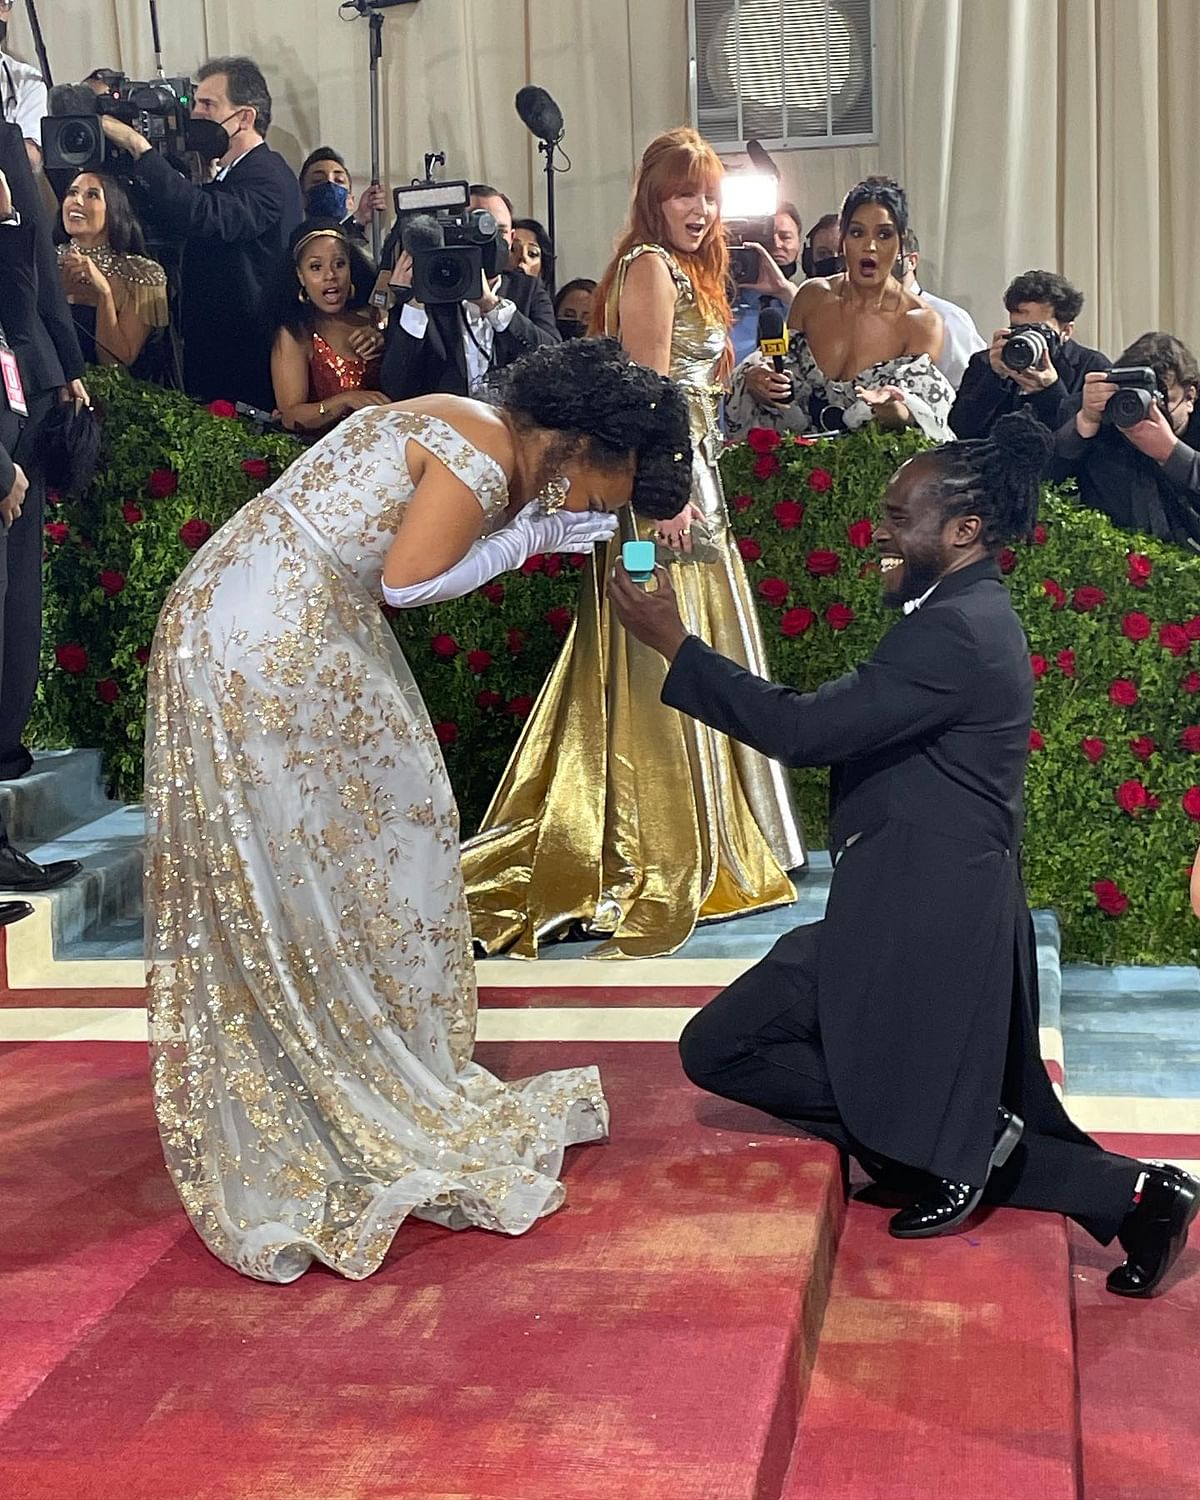 Bobby Digi Olisa proposed to the Commissioner of New York City Cultural Affairs, Laurie Cumbo at the Met Gala.